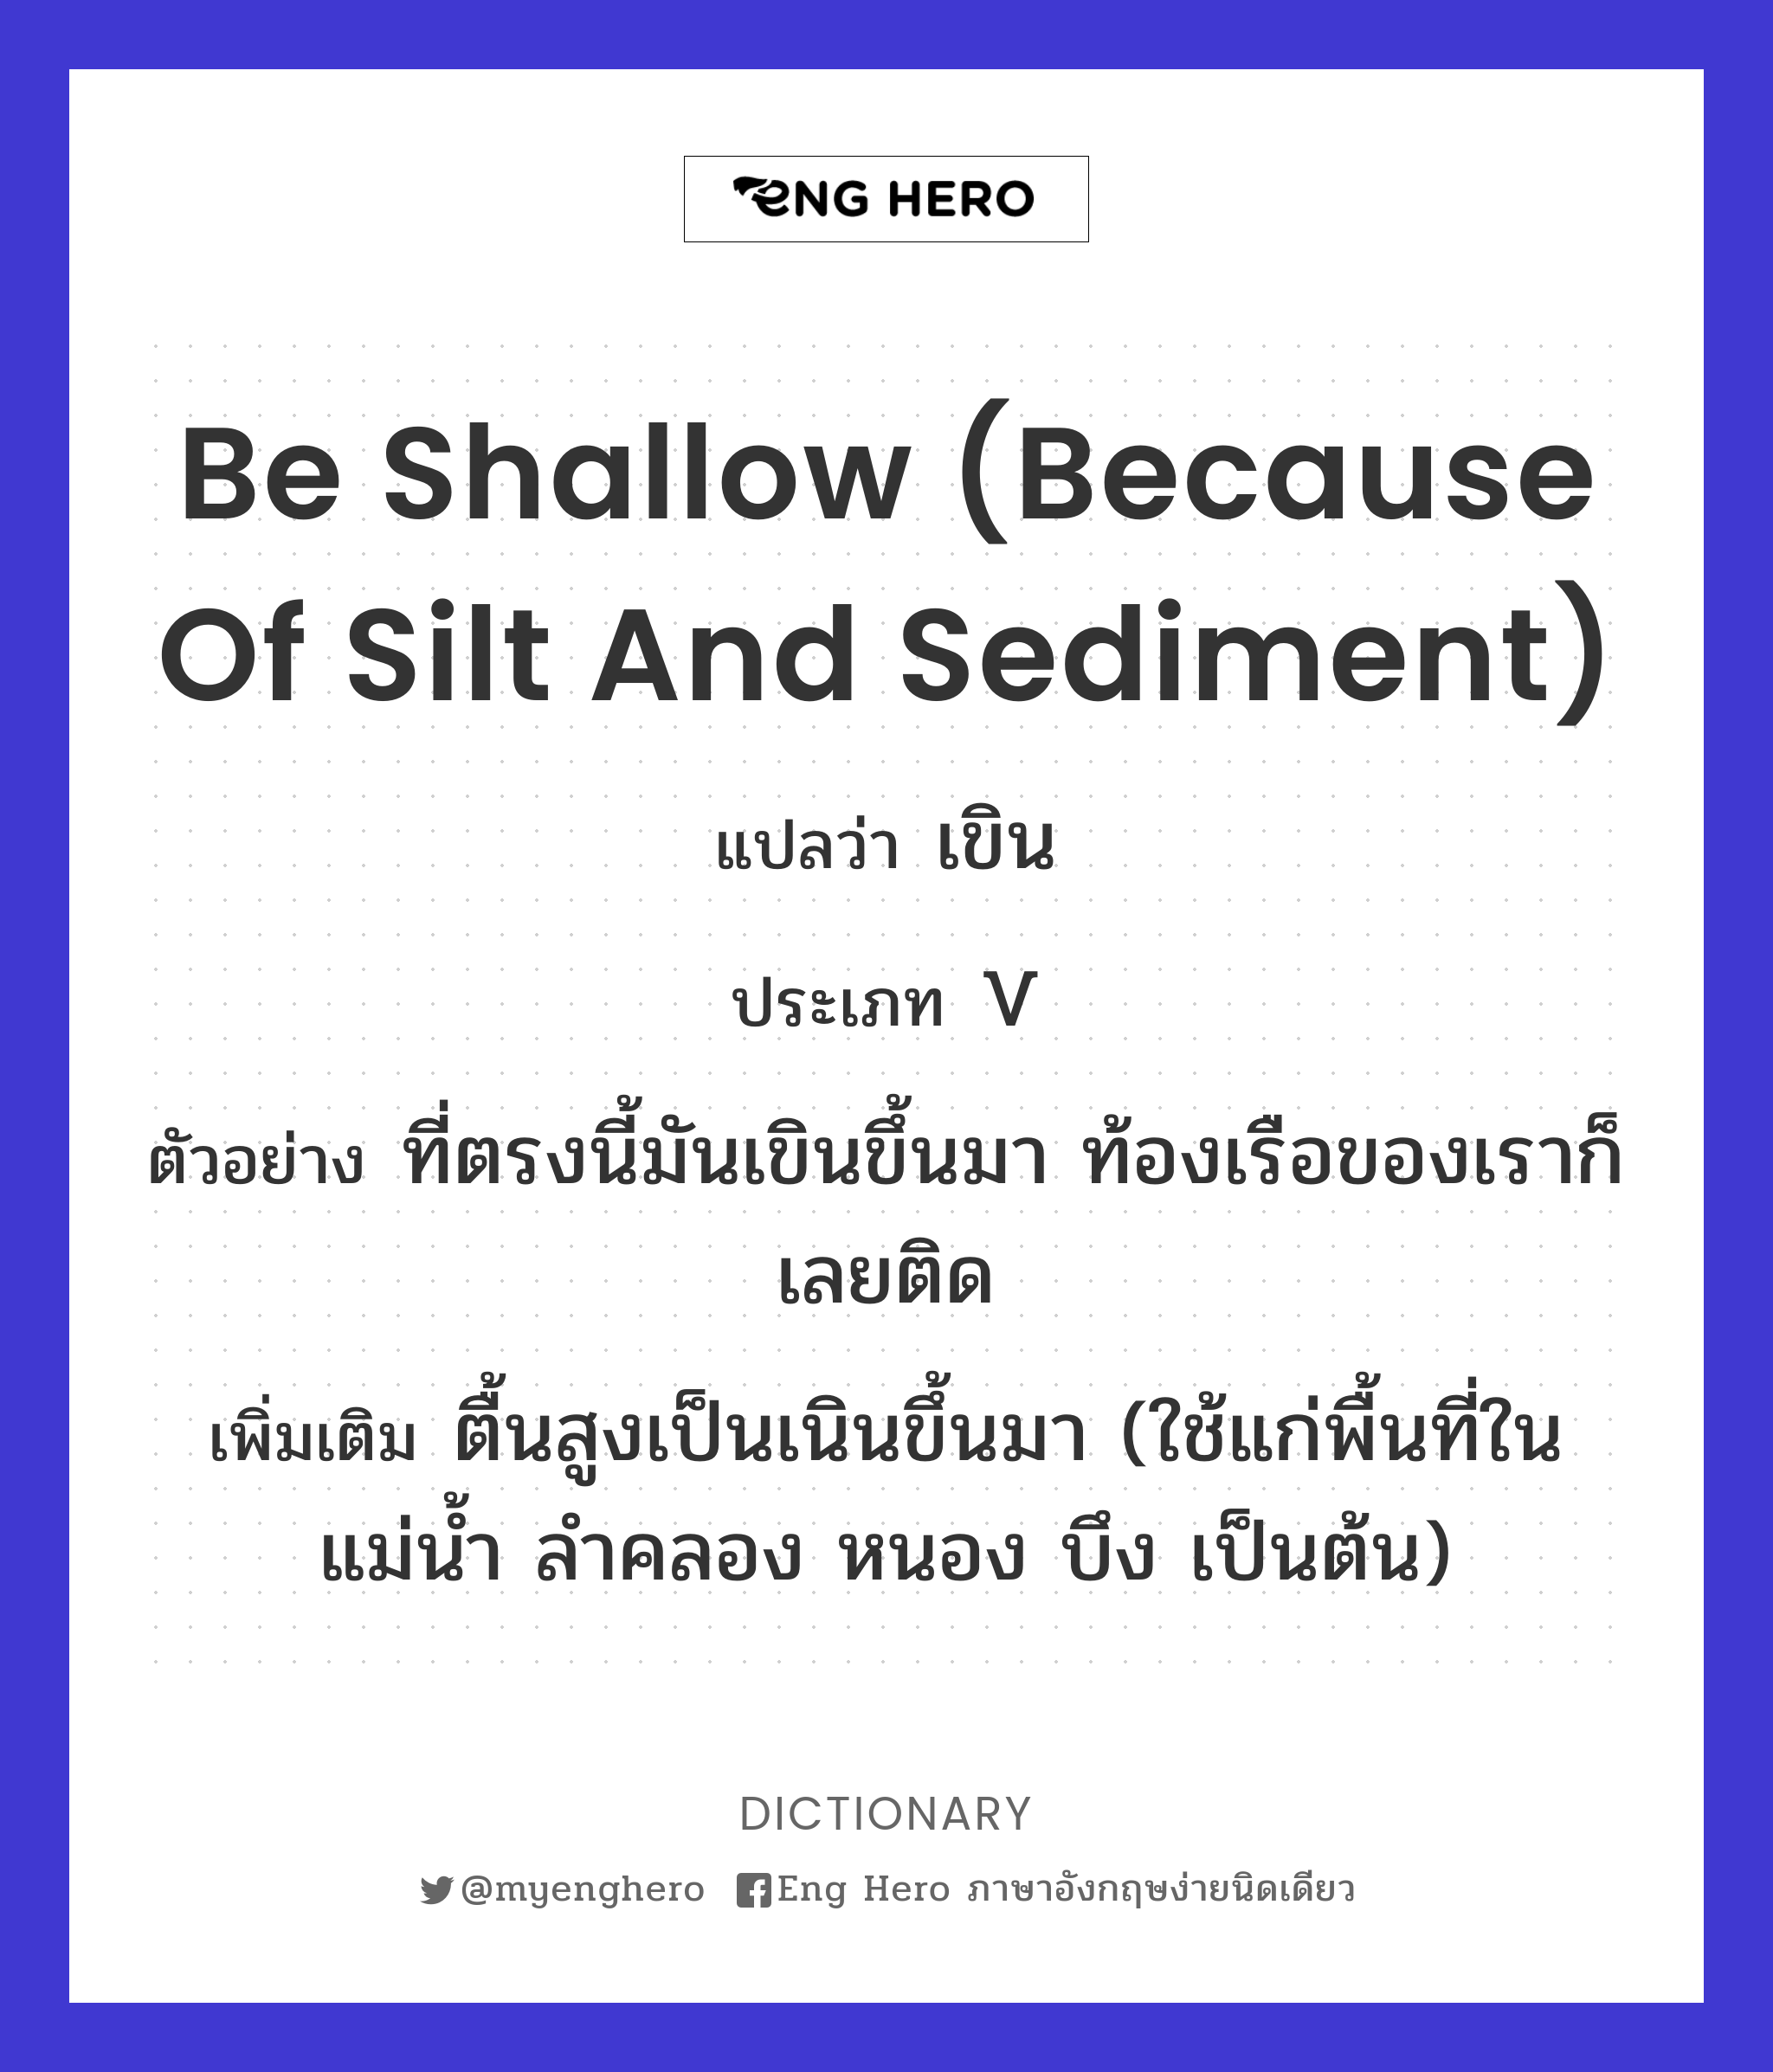 be shallow (because of silt and sediment)